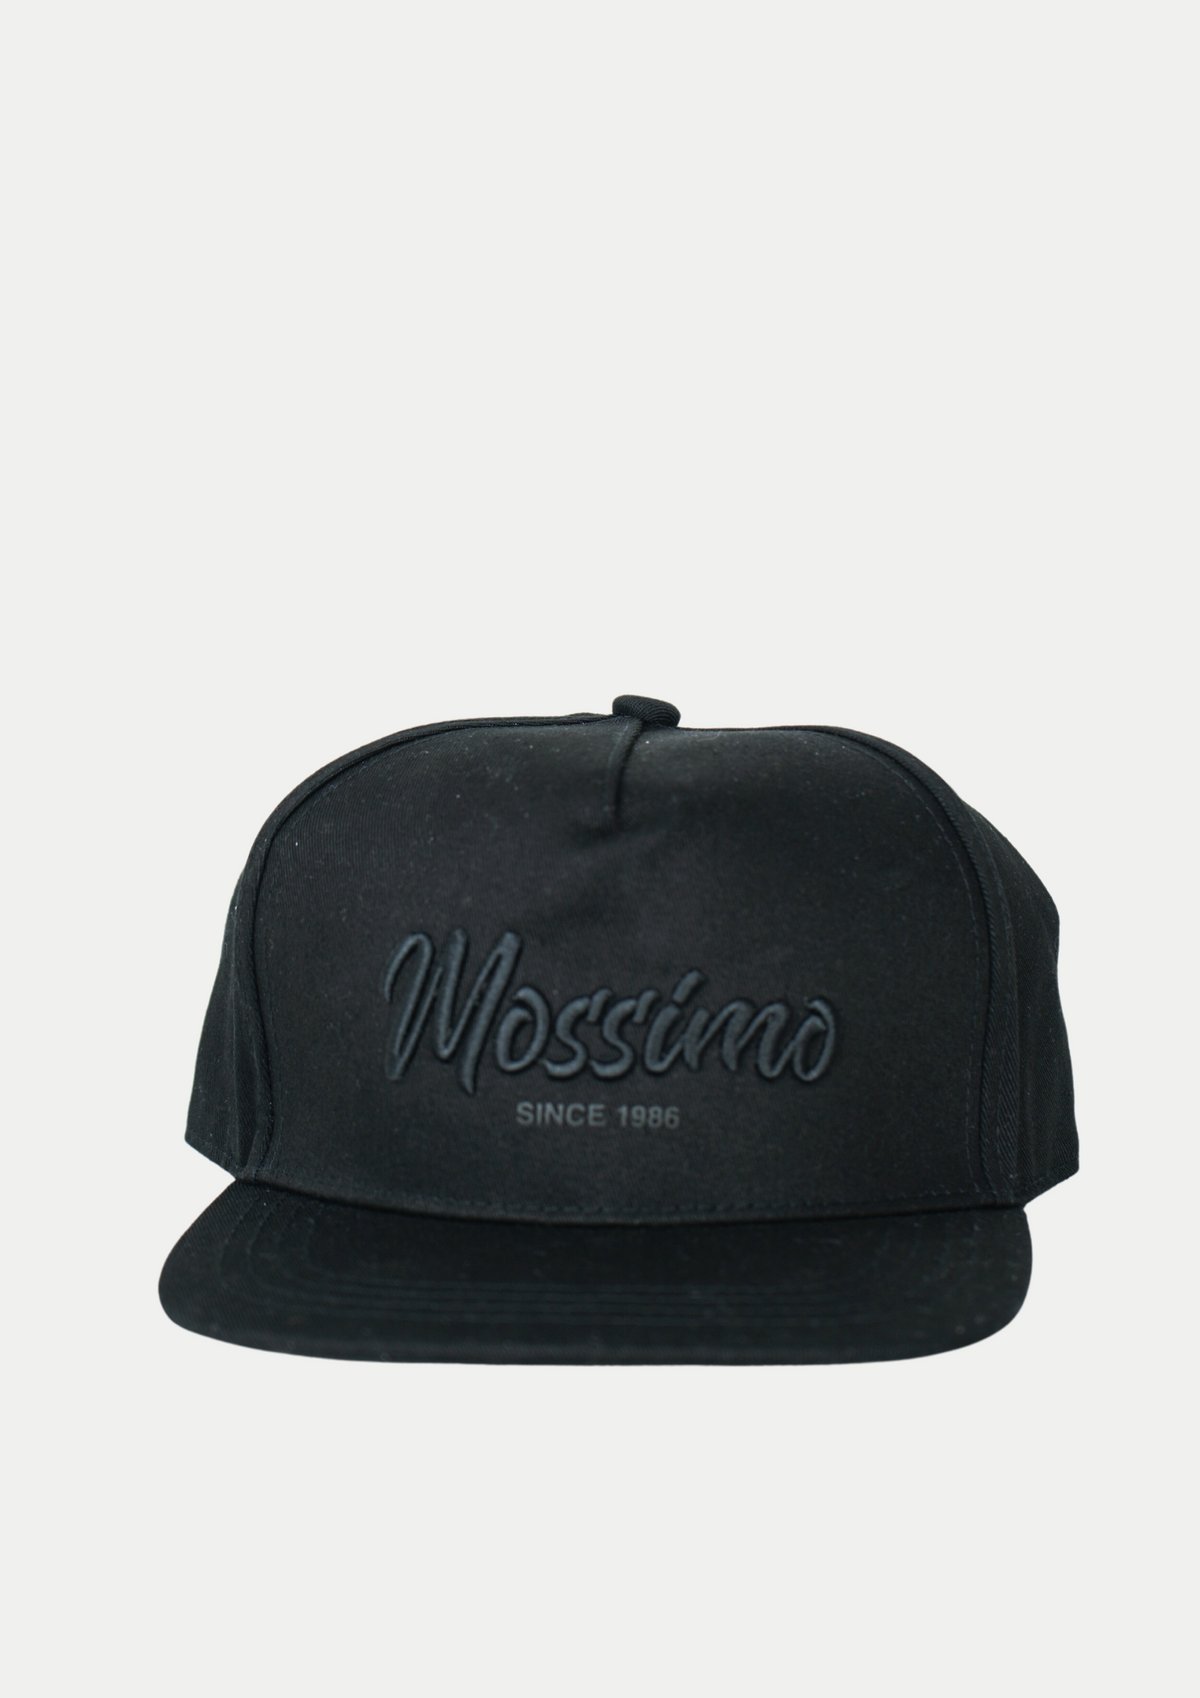 Mossimo Black Snapback Cap with Embossed Embroidery